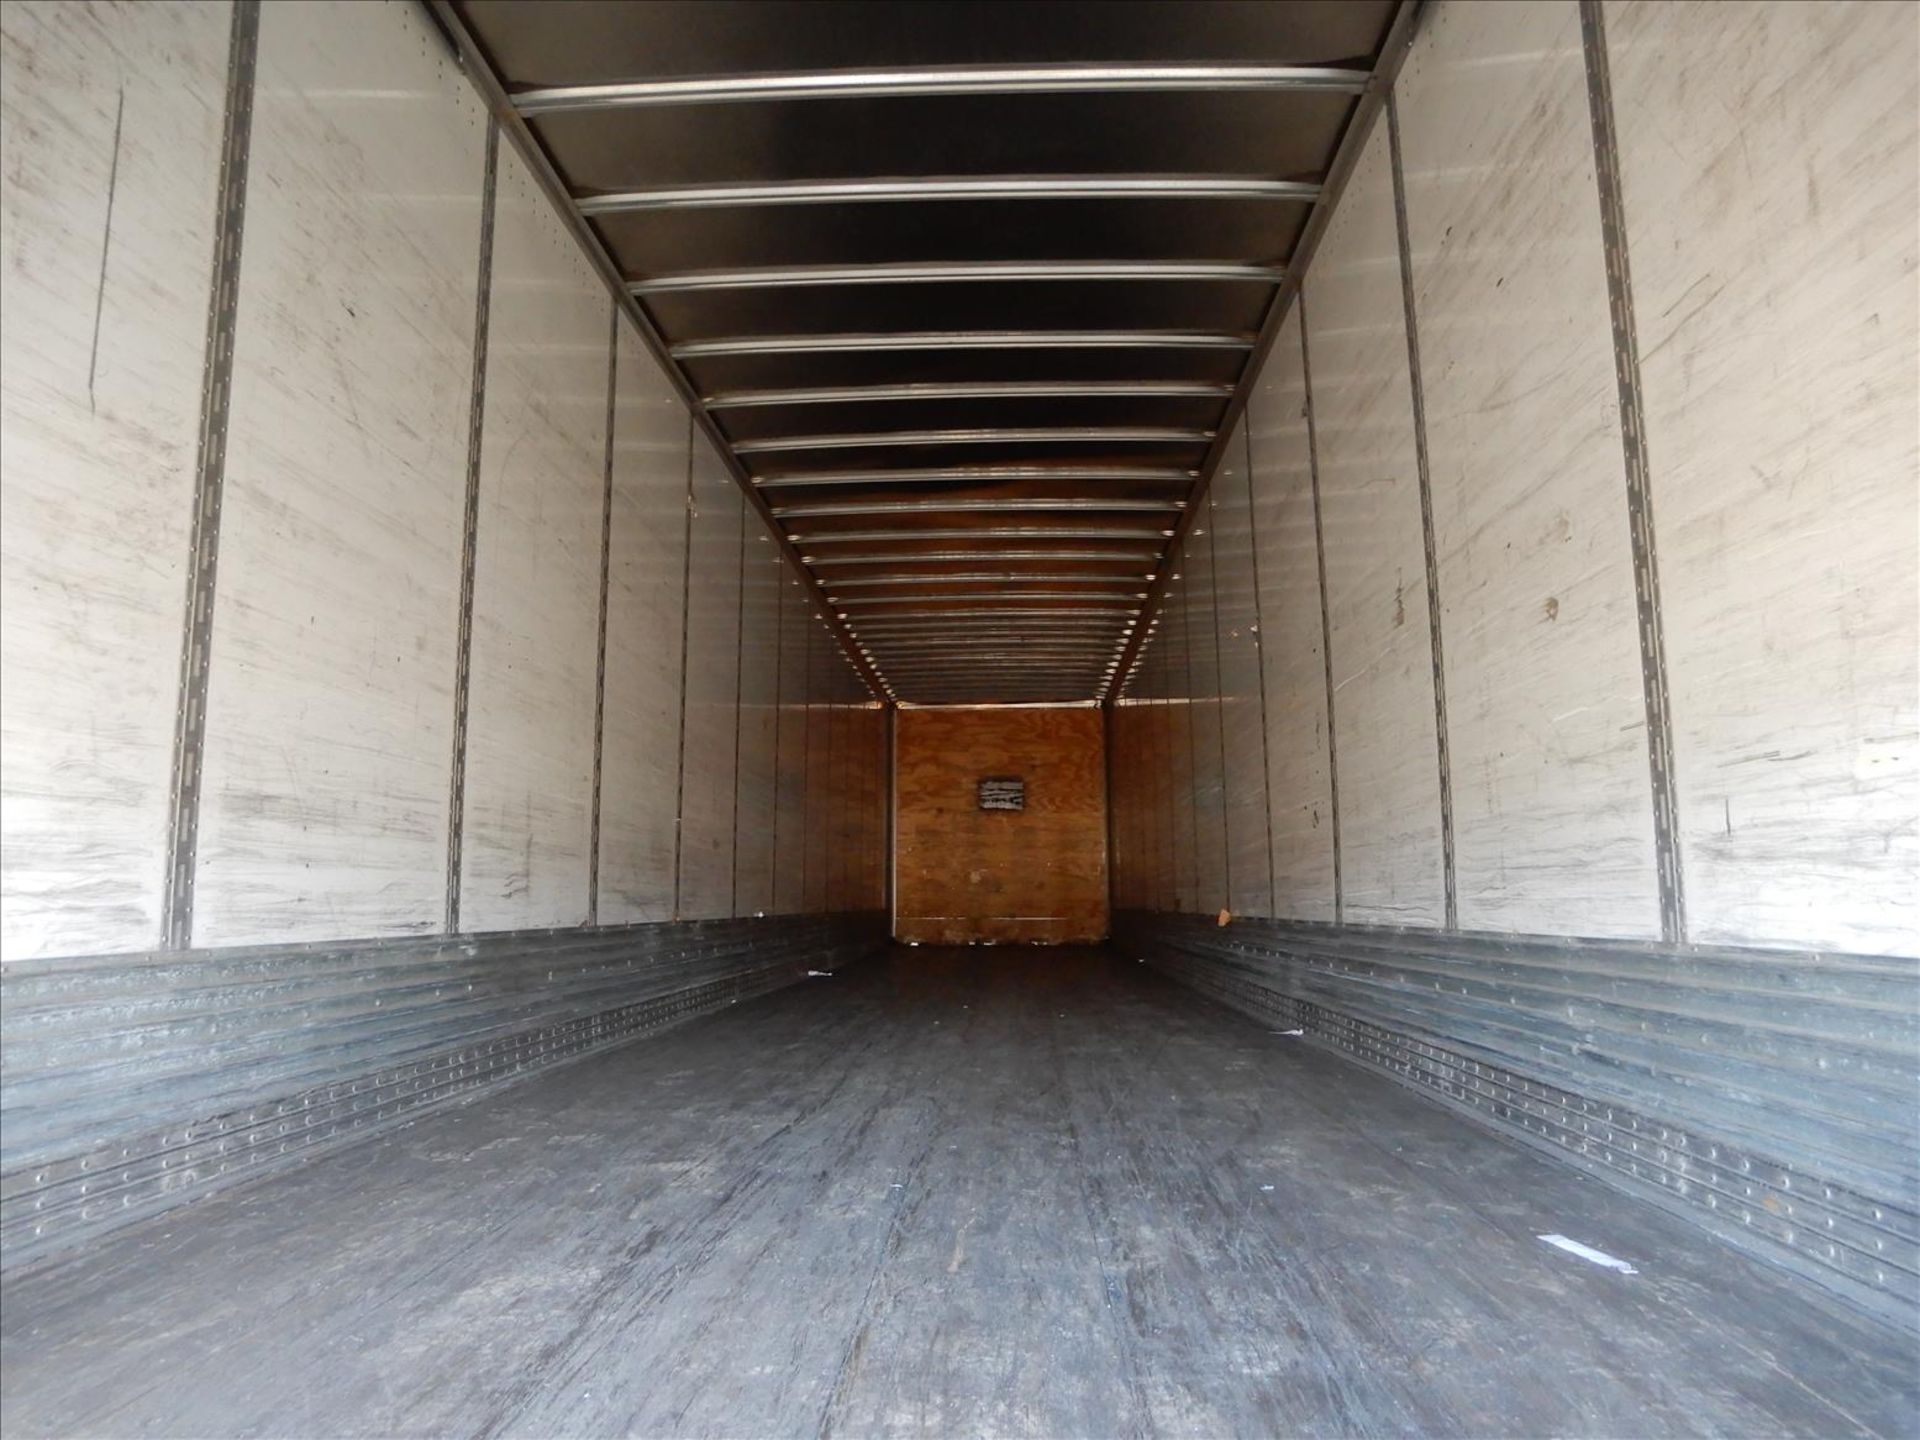 2012 Vanguard Trailer - Located in Indianapolis, IN - Image 23 of 28